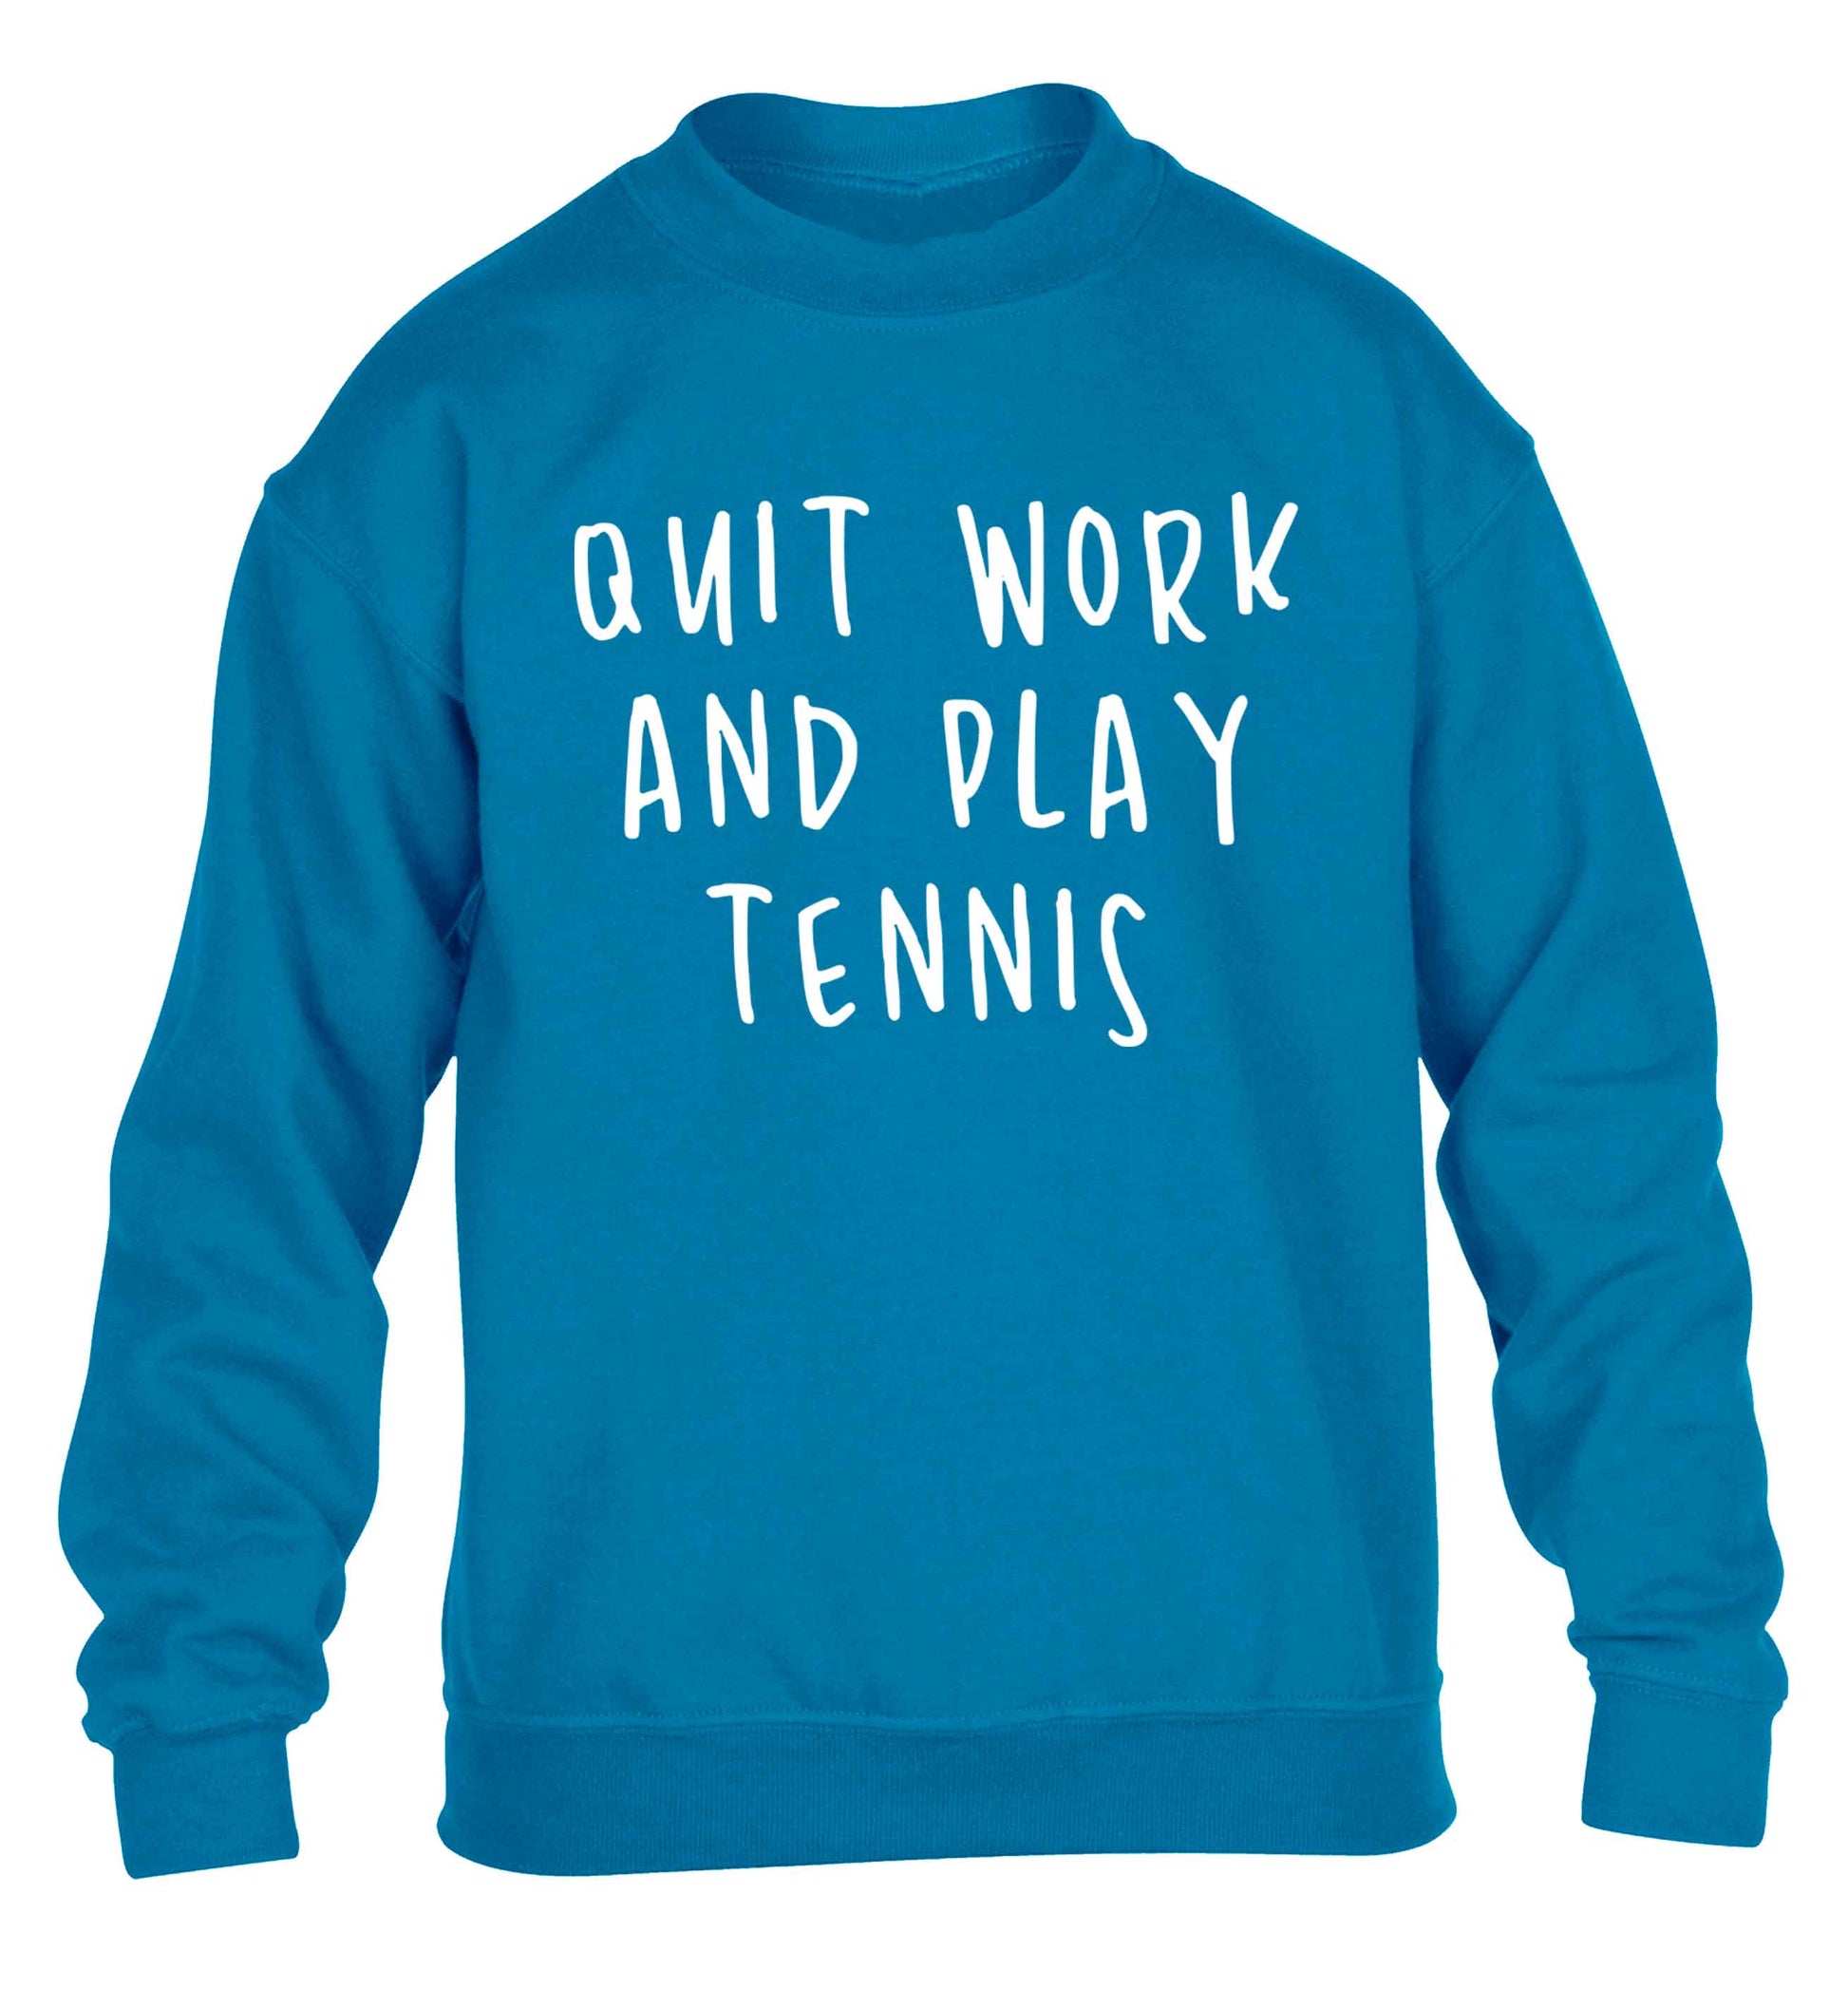 Quit work and play tennis children's blue sweater 12-13 Years